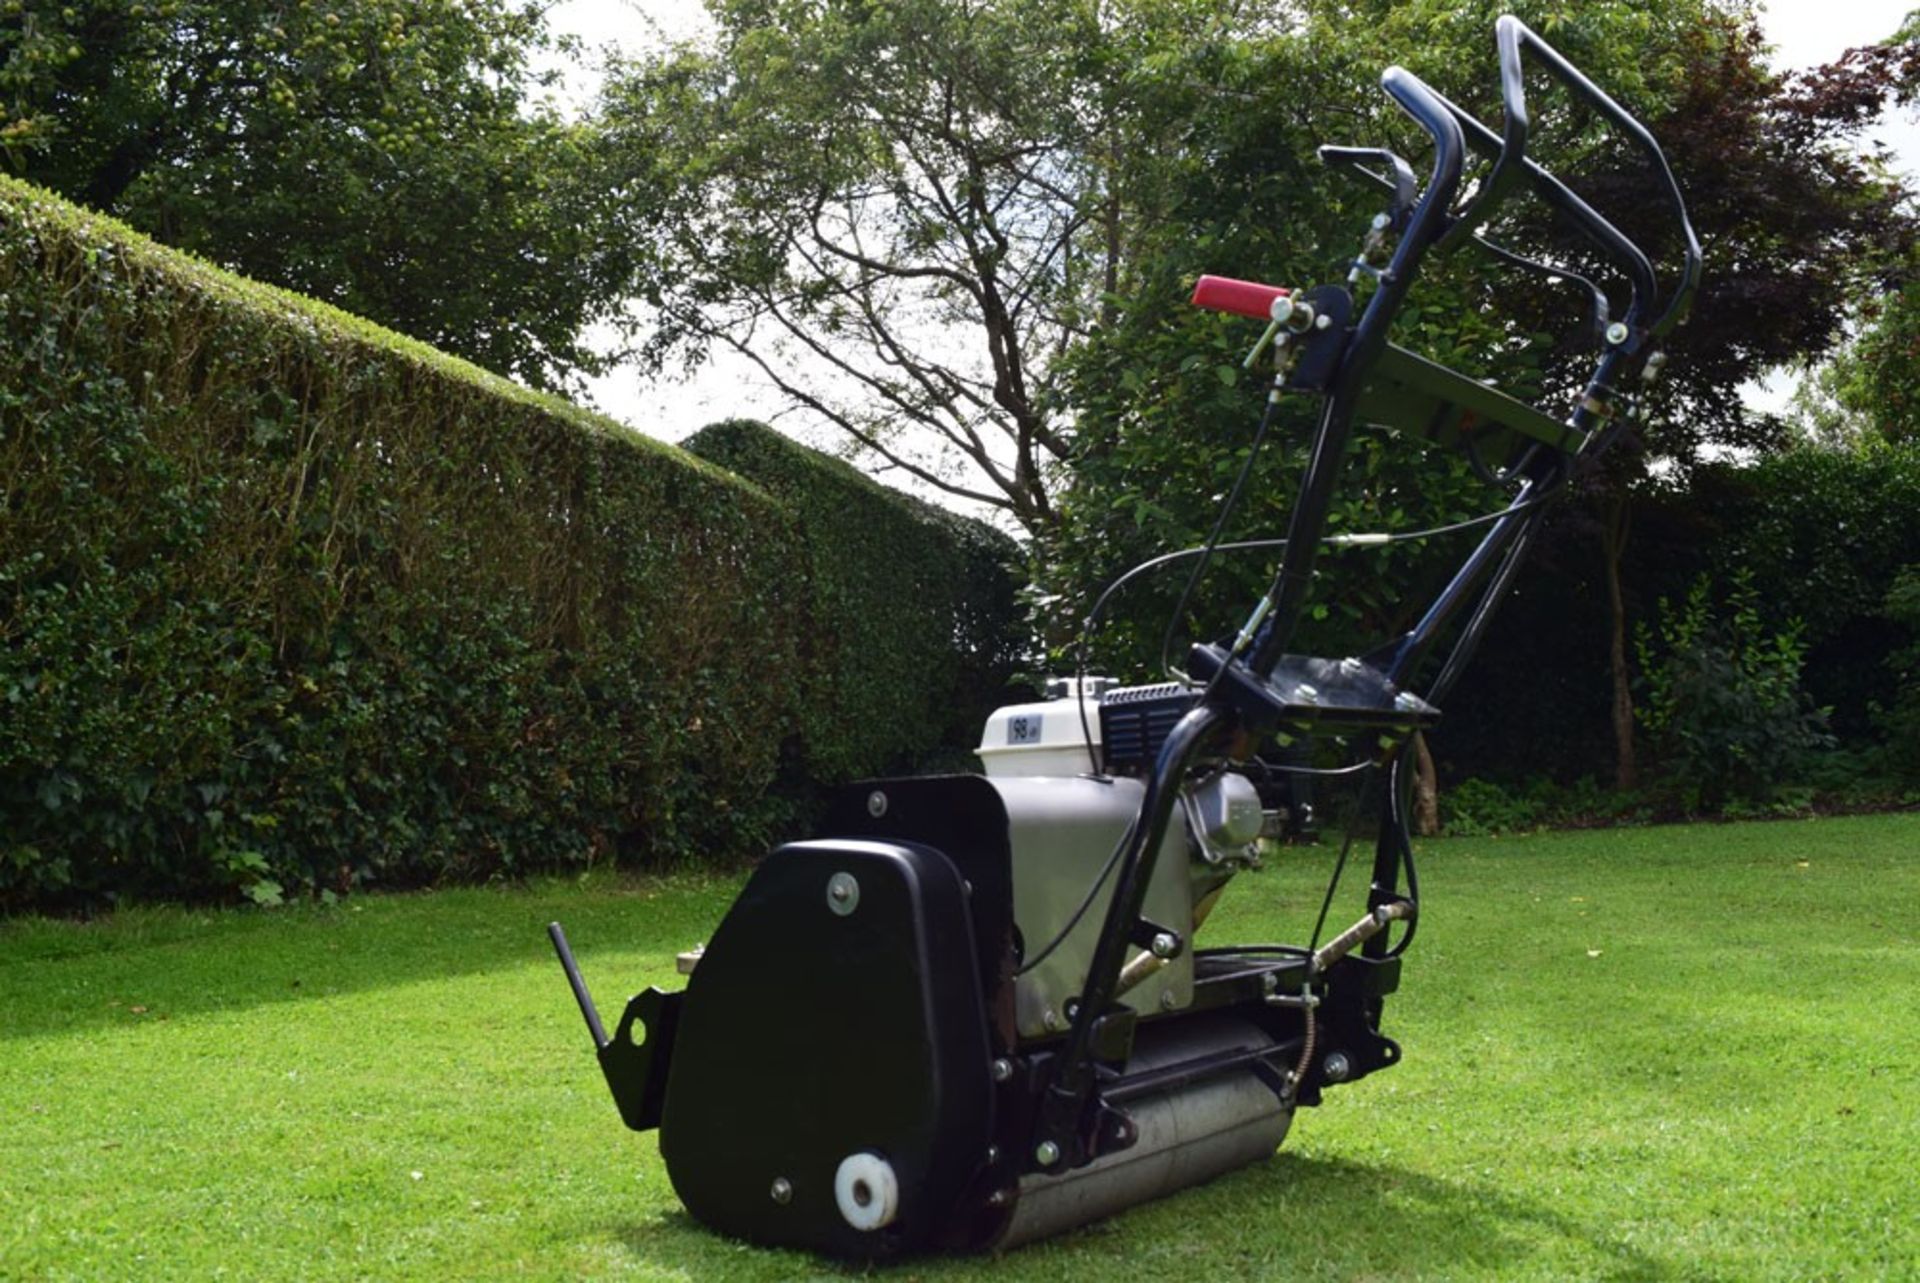 2012 Allett Shaver 20, 10 Blade Cylinder Mower With Grass Box - Image 9 of 9